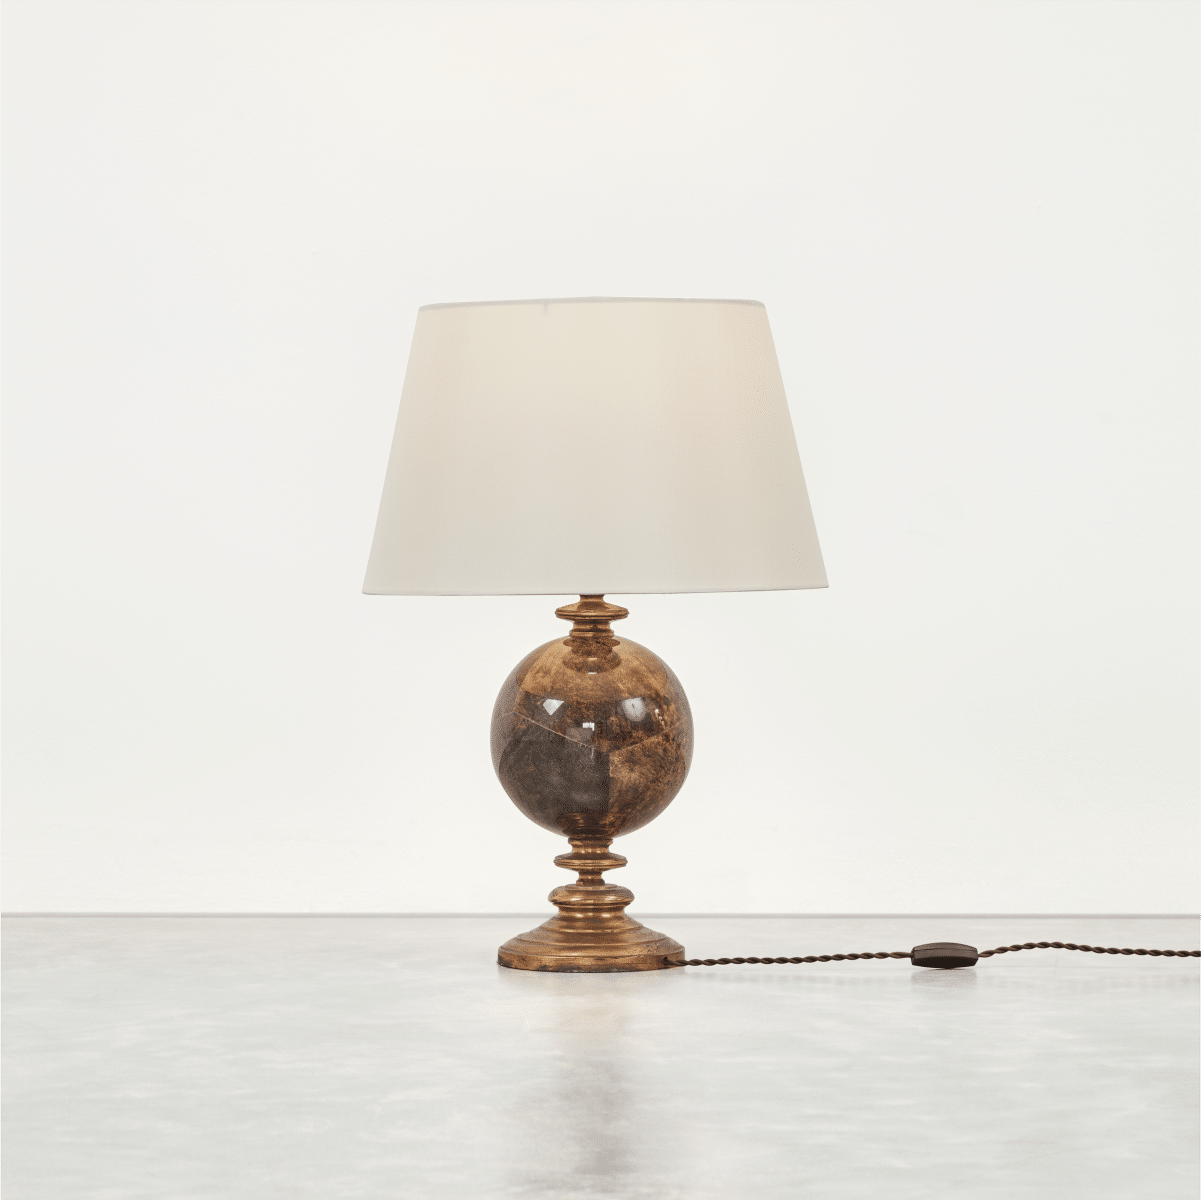 Low res for web_Parchment Table Lamp-